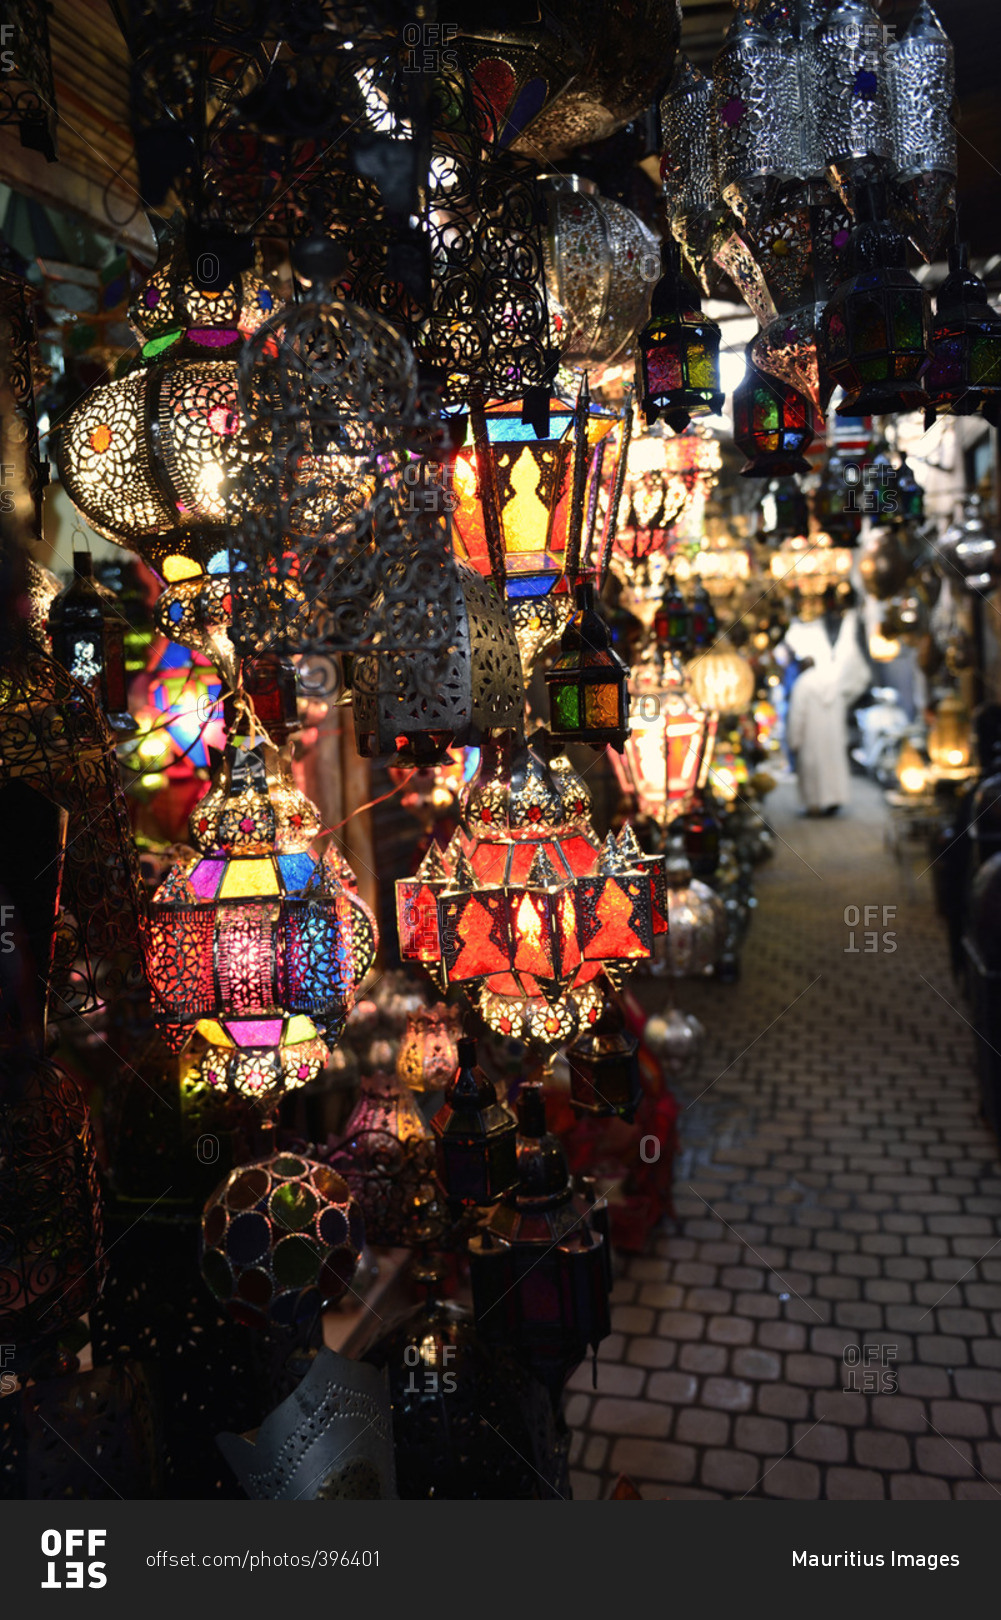 Lamps in Moroccan market